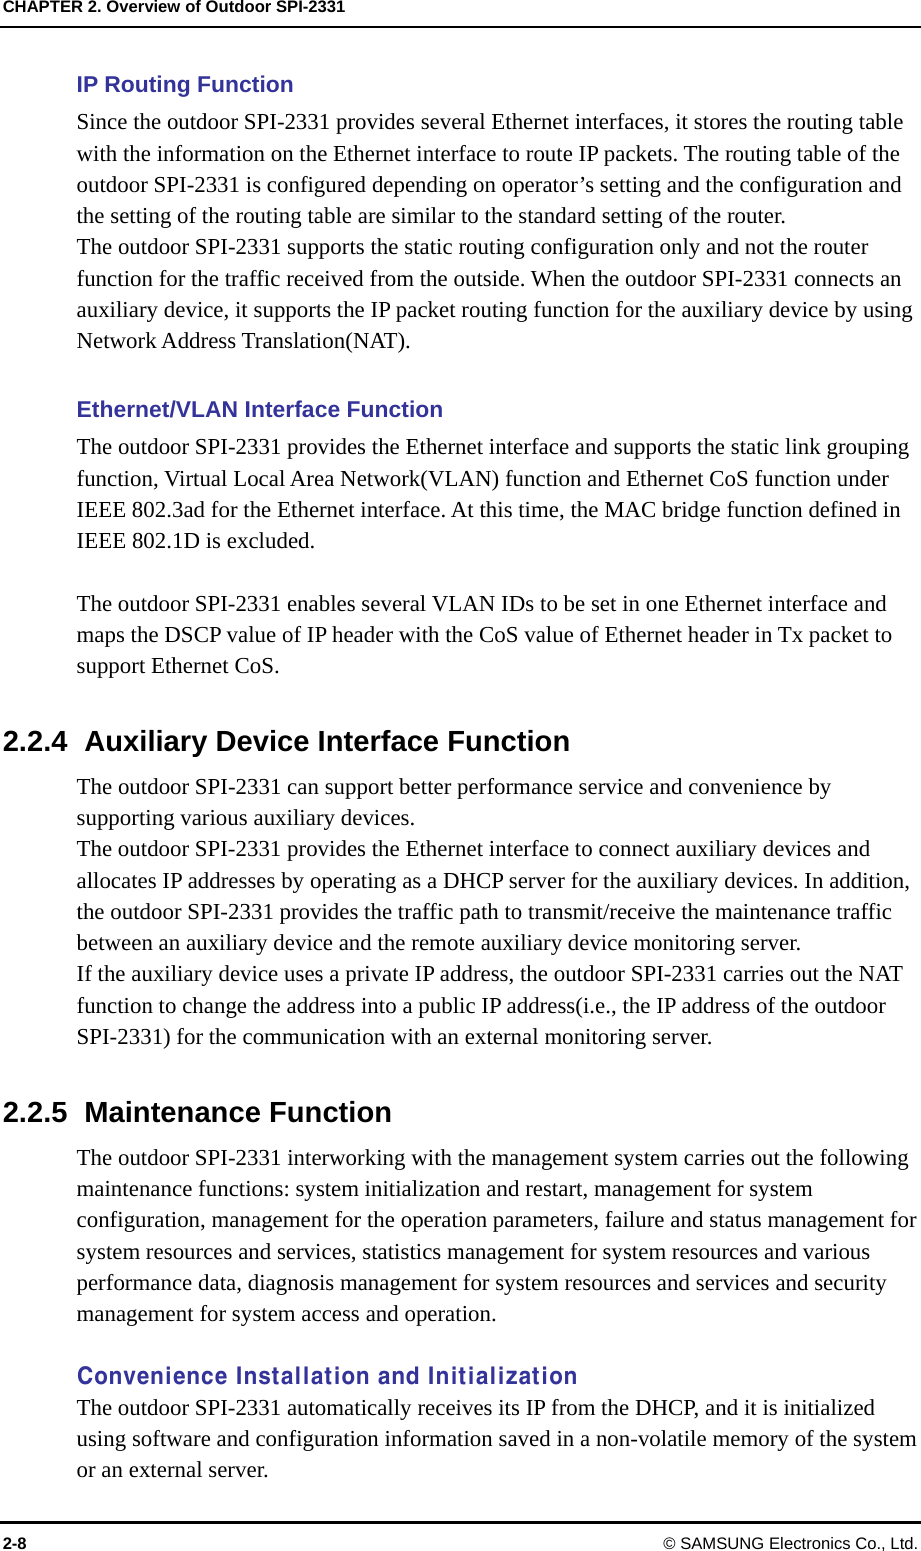 CHAPTER 2. Overview of Outdoor SPI-2331 2-8 © SAMSUNG Electronics Co., Ltd. IP Routing Function Since the outdoor SPI-2331 provides several Ethernet interfaces, it stores the routing table with the information on the Ethernet interface to route IP packets. The routing table of the outdoor SPI-2331 is configured depending on operator’s setting and the configuration and the setting of the routing table are similar to the standard setting of the router. The outdoor SPI-2331 supports the static routing configuration only and not the router function for the traffic received from the outside. When the outdoor SPI-2331 connects an auxiliary device, it supports the IP packet routing function for the auxiliary device by using Network Address Translation(NAT).  Ethernet/VLAN Interface Function The outdoor SPI-2331 provides the Ethernet interface and supports the static link grouping function, Virtual Local Area Network(VLAN) function and Ethernet CoS function under IEEE 802.3ad for the Ethernet interface. At this time, the MAC bridge function defined in IEEE 802.1D is excluded.  The outdoor SPI-2331 enables several VLAN IDs to be set in one Ethernet interface and maps the DSCP value of IP header with the CoS value of Ethernet header in Tx packet to support Ethernet CoS.  2.2.4  Auxiliary Device Interface Function The outdoor SPI-2331 can support better performance service and convenience by supporting various auxiliary devices.   The outdoor SPI-2331 provides the Ethernet interface to connect auxiliary devices and allocates IP addresses by operating as a DHCP server for the auxiliary devices. In addition, the outdoor SPI-2331 provides the traffic path to transmit/receive the maintenance traffic between an auxiliary device and the remote auxiliary device monitoring server.   If the auxiliary device uses a private IP address, the outdoor SPI-2331 carries out the NAT function to change the address into a public IP address(i.e., the IP address of the outdoor SPI-2331) for the communication with an external monitoring server.  2.2.5 Maintenance Function The outdoor SPI-2331 interworking with the management system carries out the following maintenance functions: system initialization and restart, management for system configuration, management for the operation parameters, failure and status management for system resources and services, statistics management for system resources and various performance data, diagnosis management for system resources and services and security management for system access and operation.  Convenience Installation and Initialization The outdoor SPI-2331 automatically receives its IP from the DHCP, and it is initialized using software and configuration information saved in a non-volatile memory of the system or an external server. 